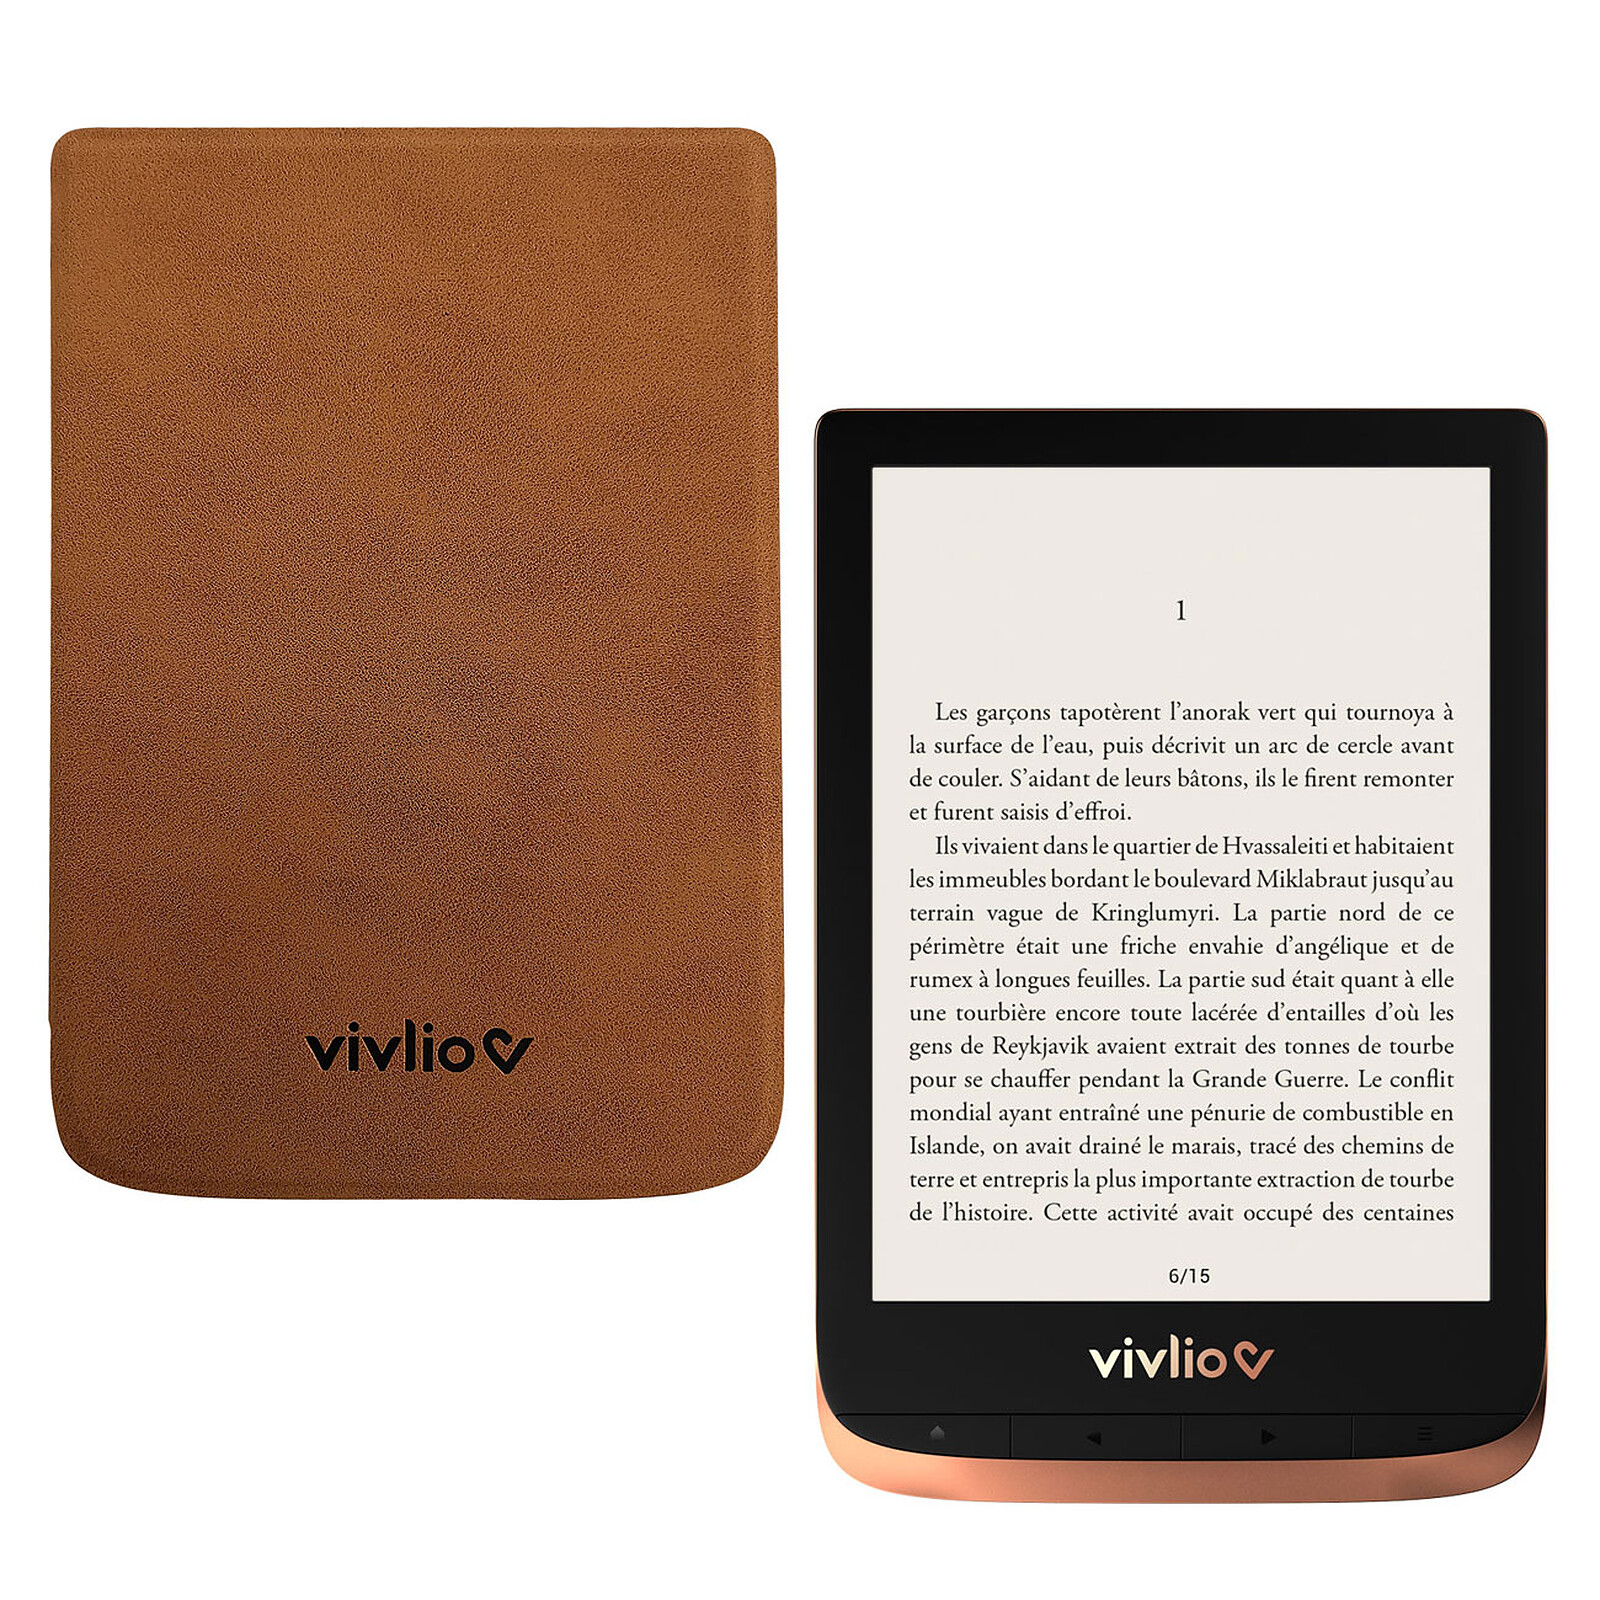 Vivlio Touch HD Plus Copper/Black Free eBook Pack Brown Case - E-reader -  LDLC 3-year warranty